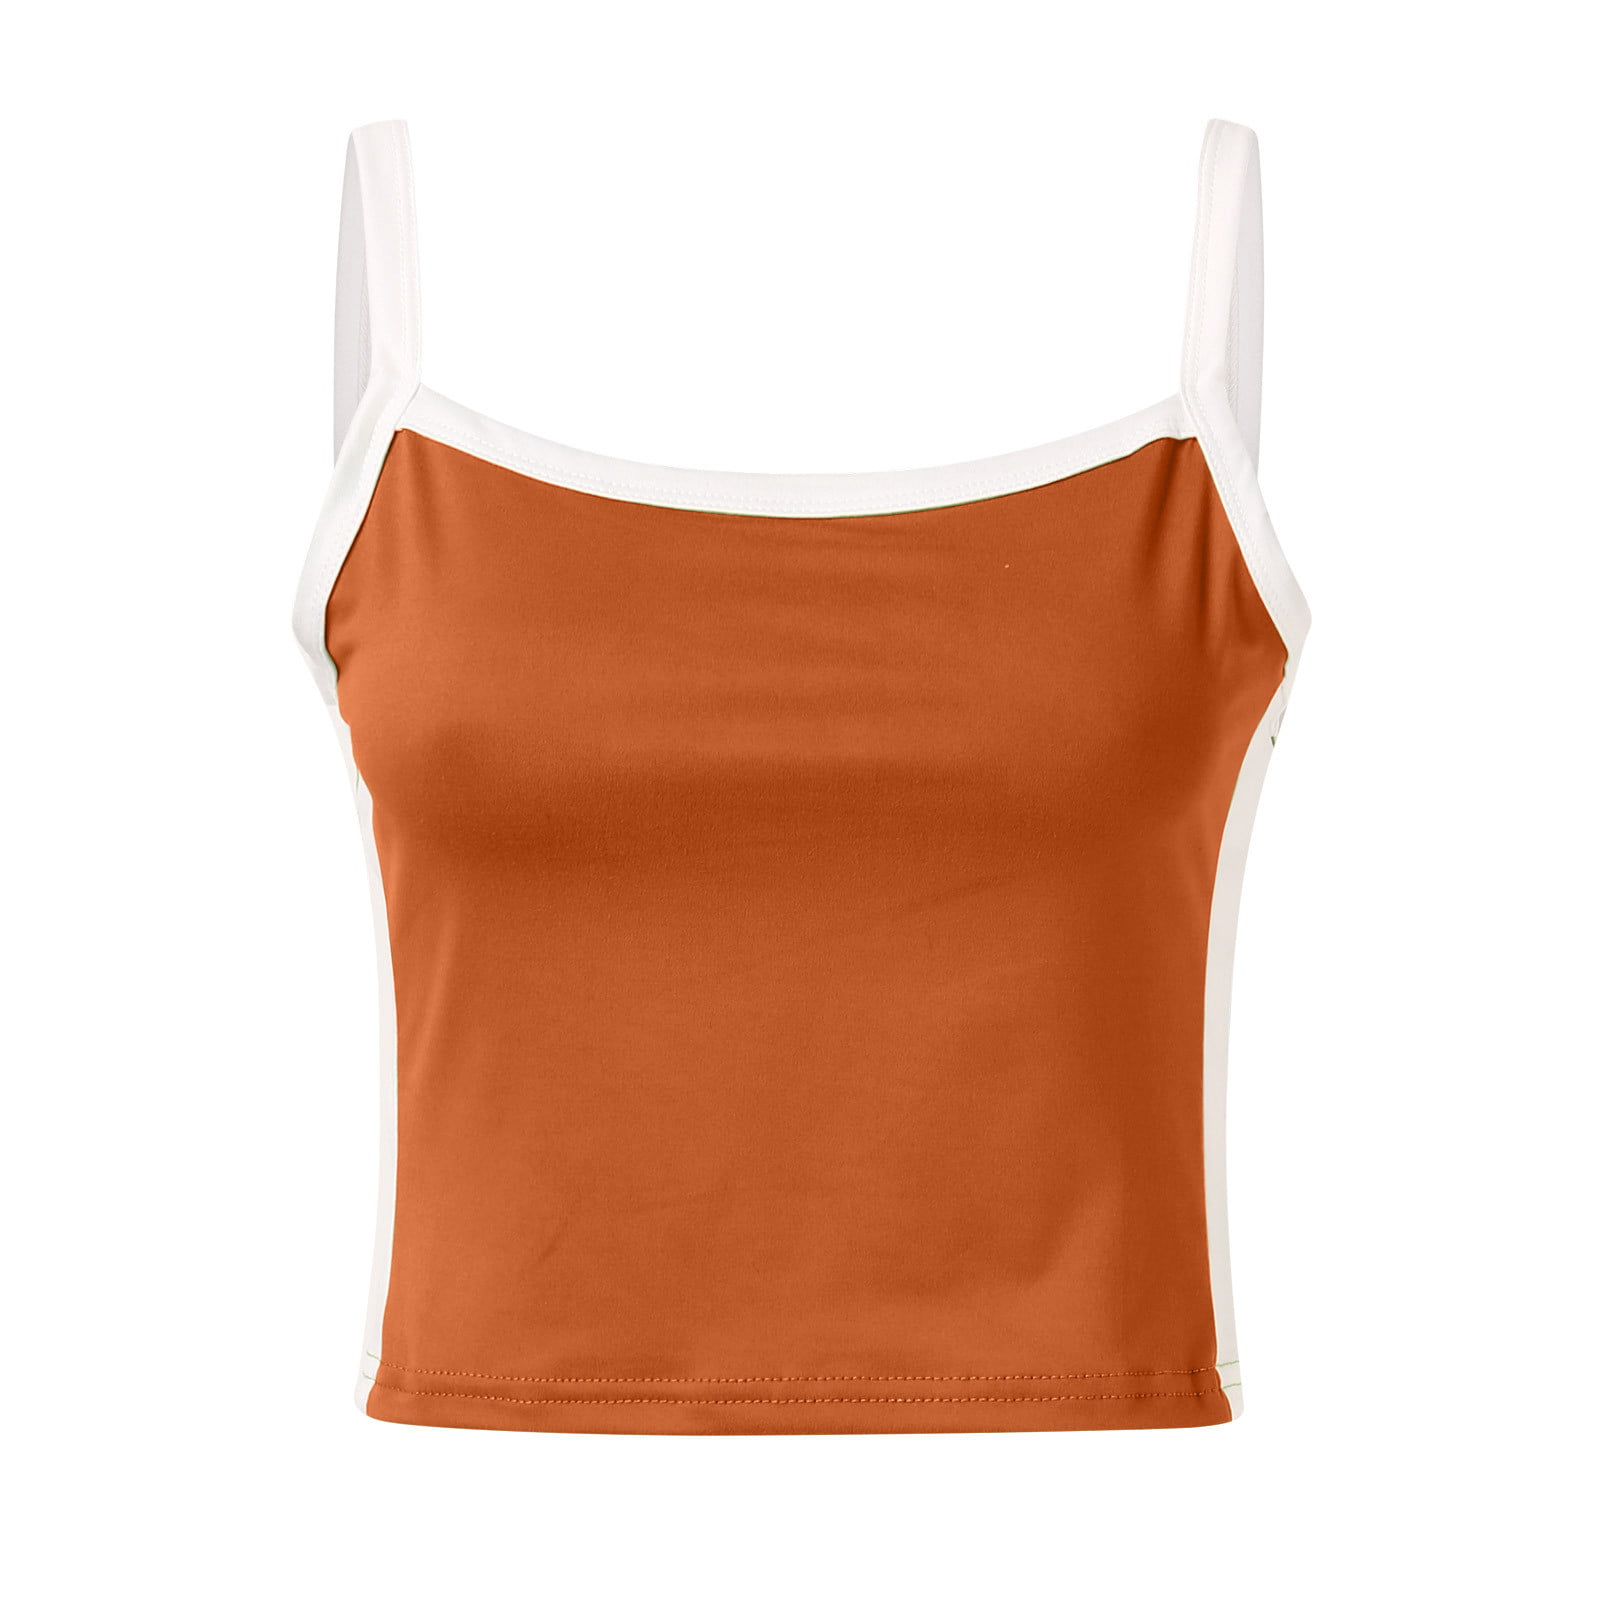 Cathalem Sports Bra Tank Tops for Women Summer Loose Fit Shirts